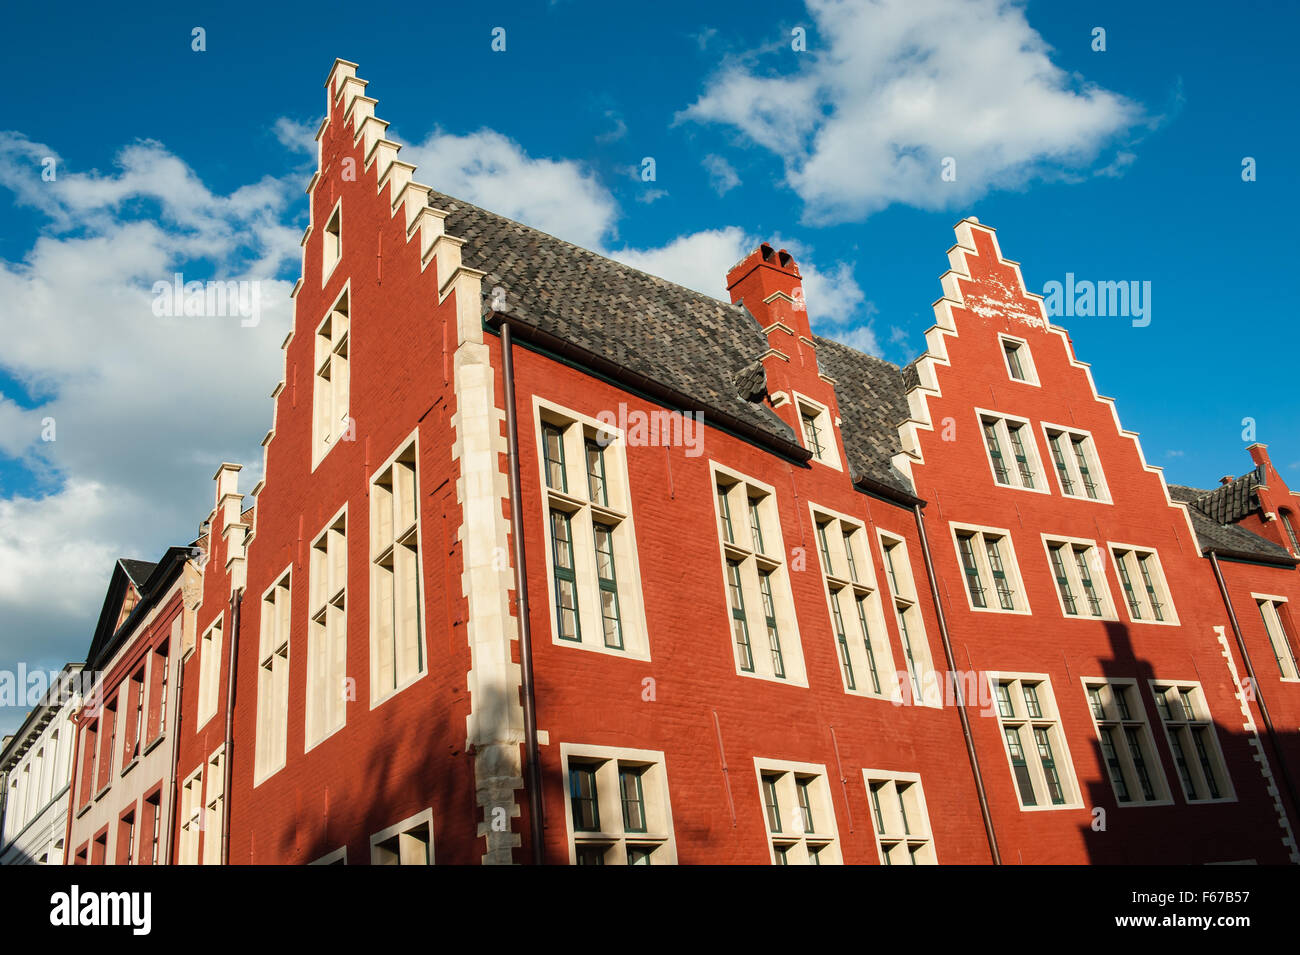 Red gable roof of a historic house in Ghent, Belgium. Stock Photo